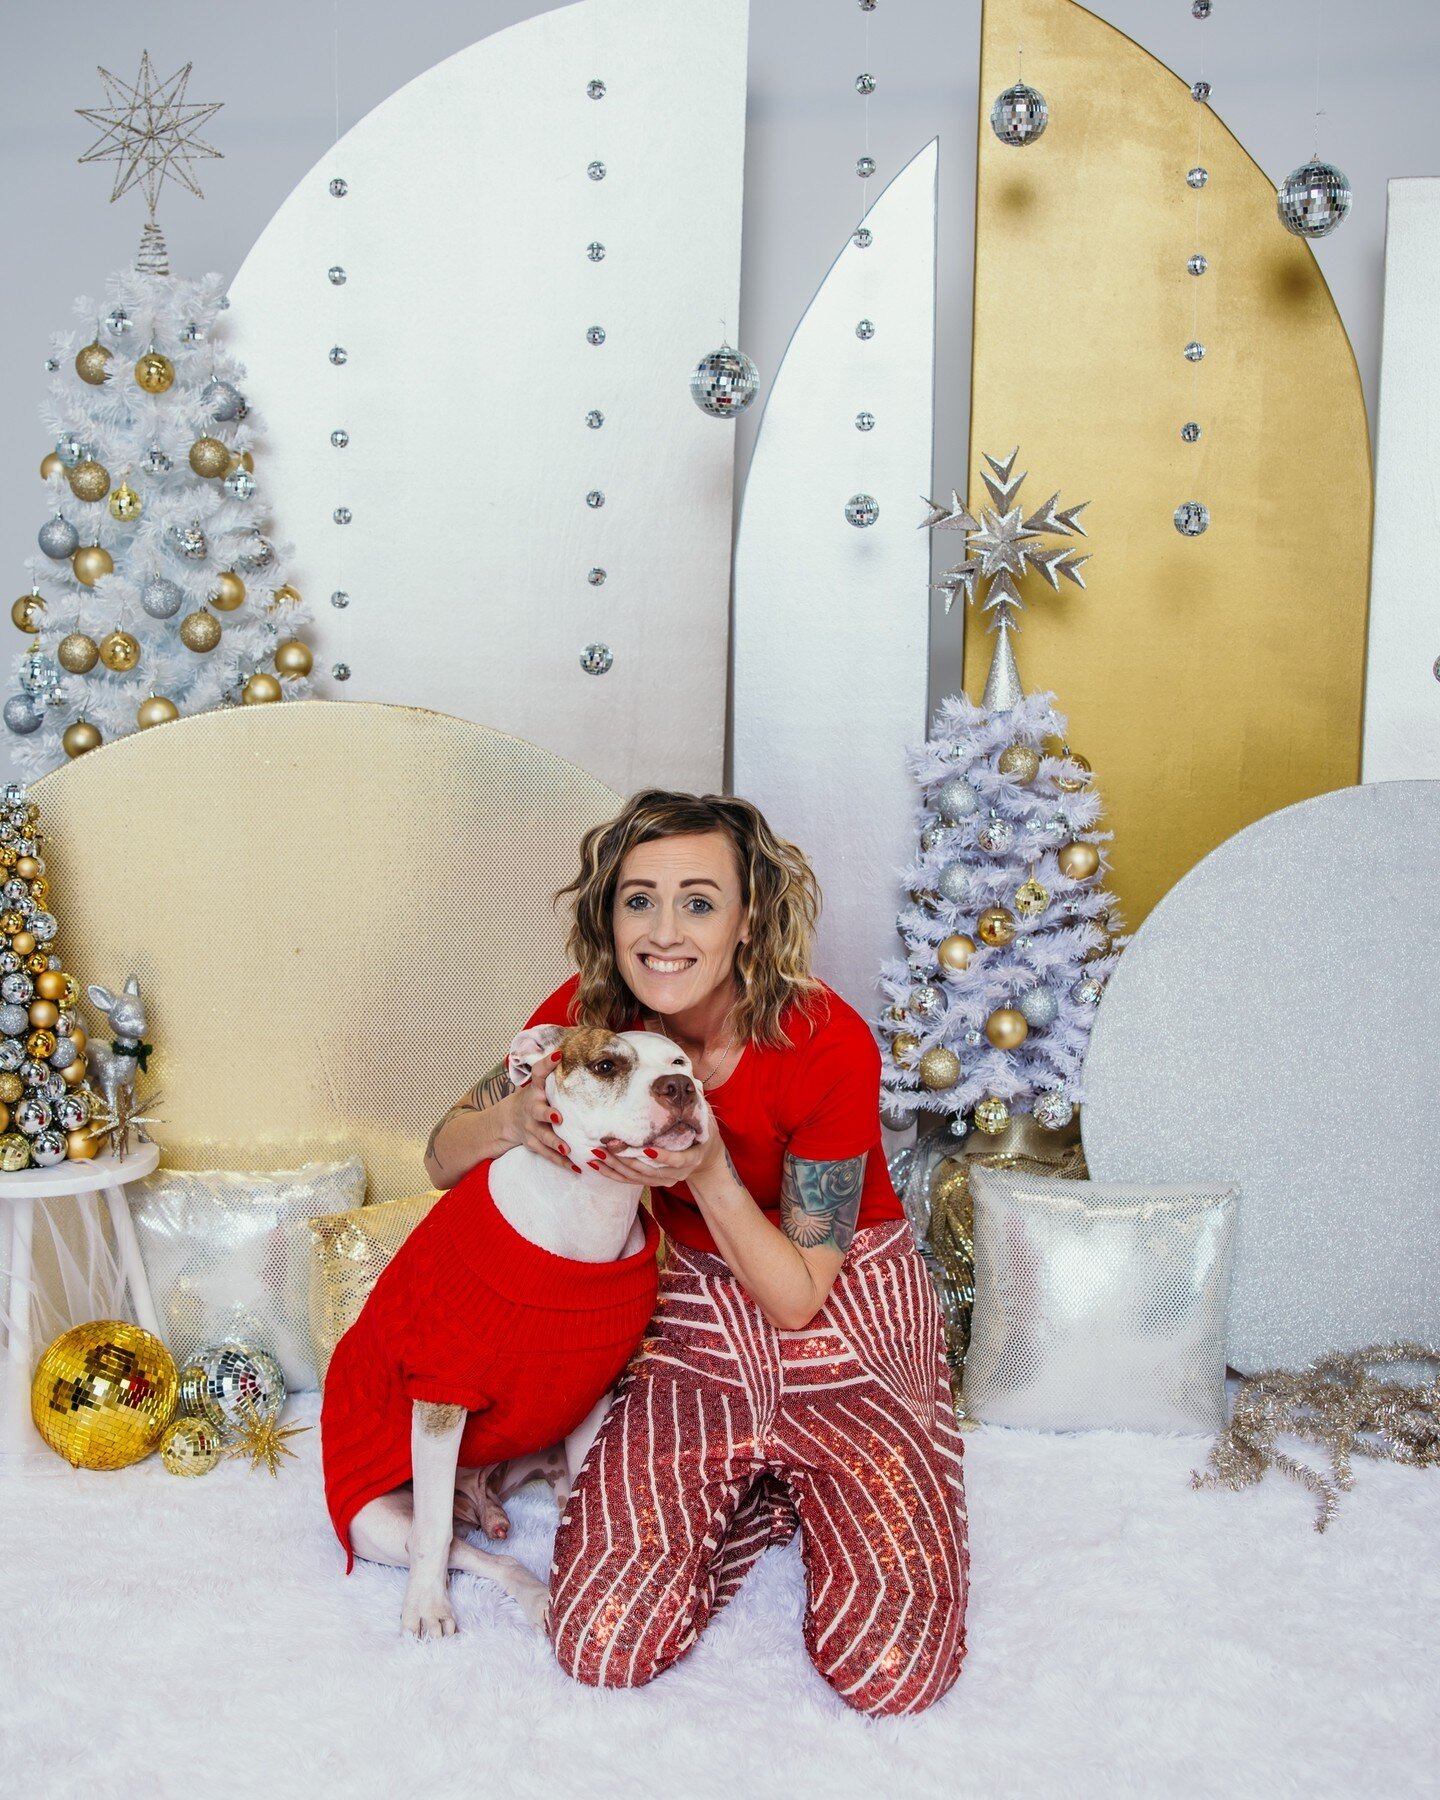 Happy Holidays from Maggie here at Lovelife Crew!⁠
⁠
I am the owner of this amazing business. I have an amazing crew that I could not be more thankful for. I am so happy with how our first year went and cannot wait to see all the beautiful photos of 